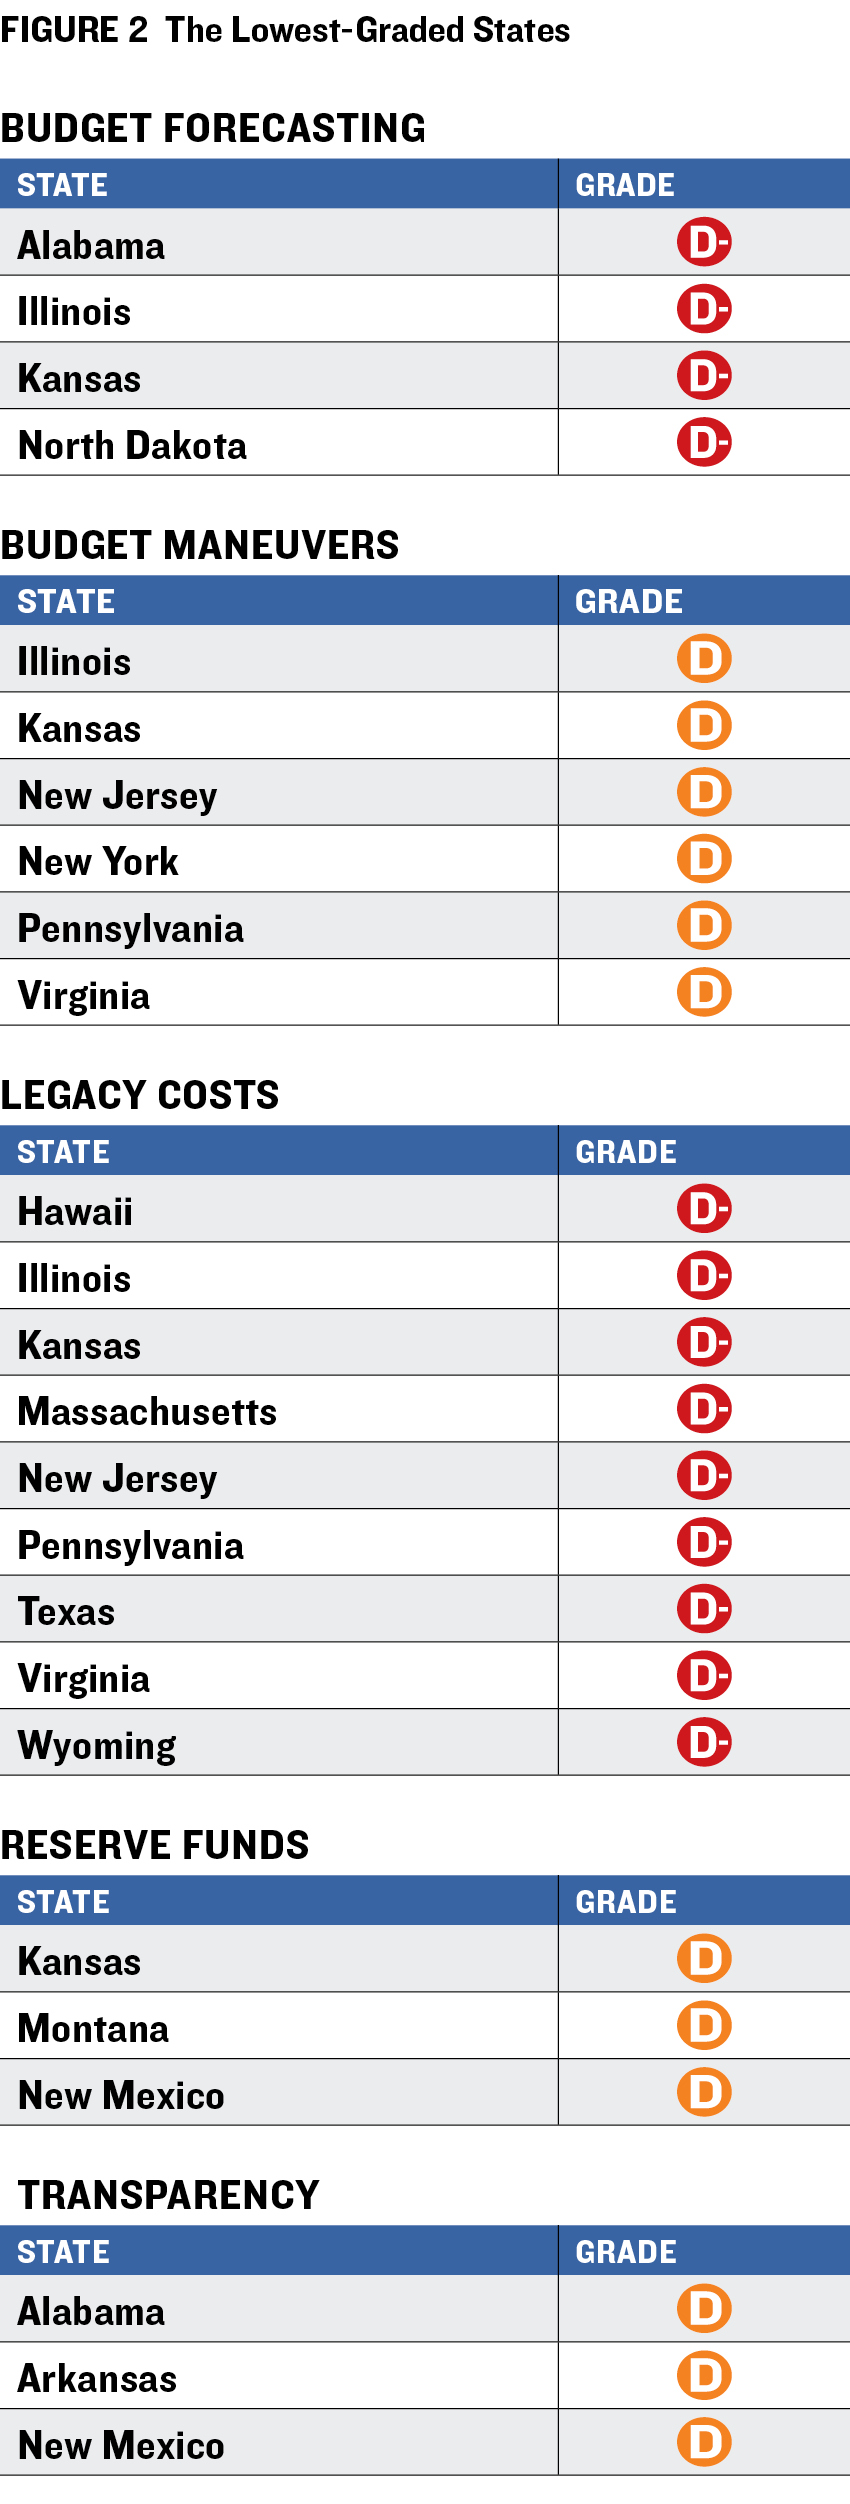 Lowest Graded States